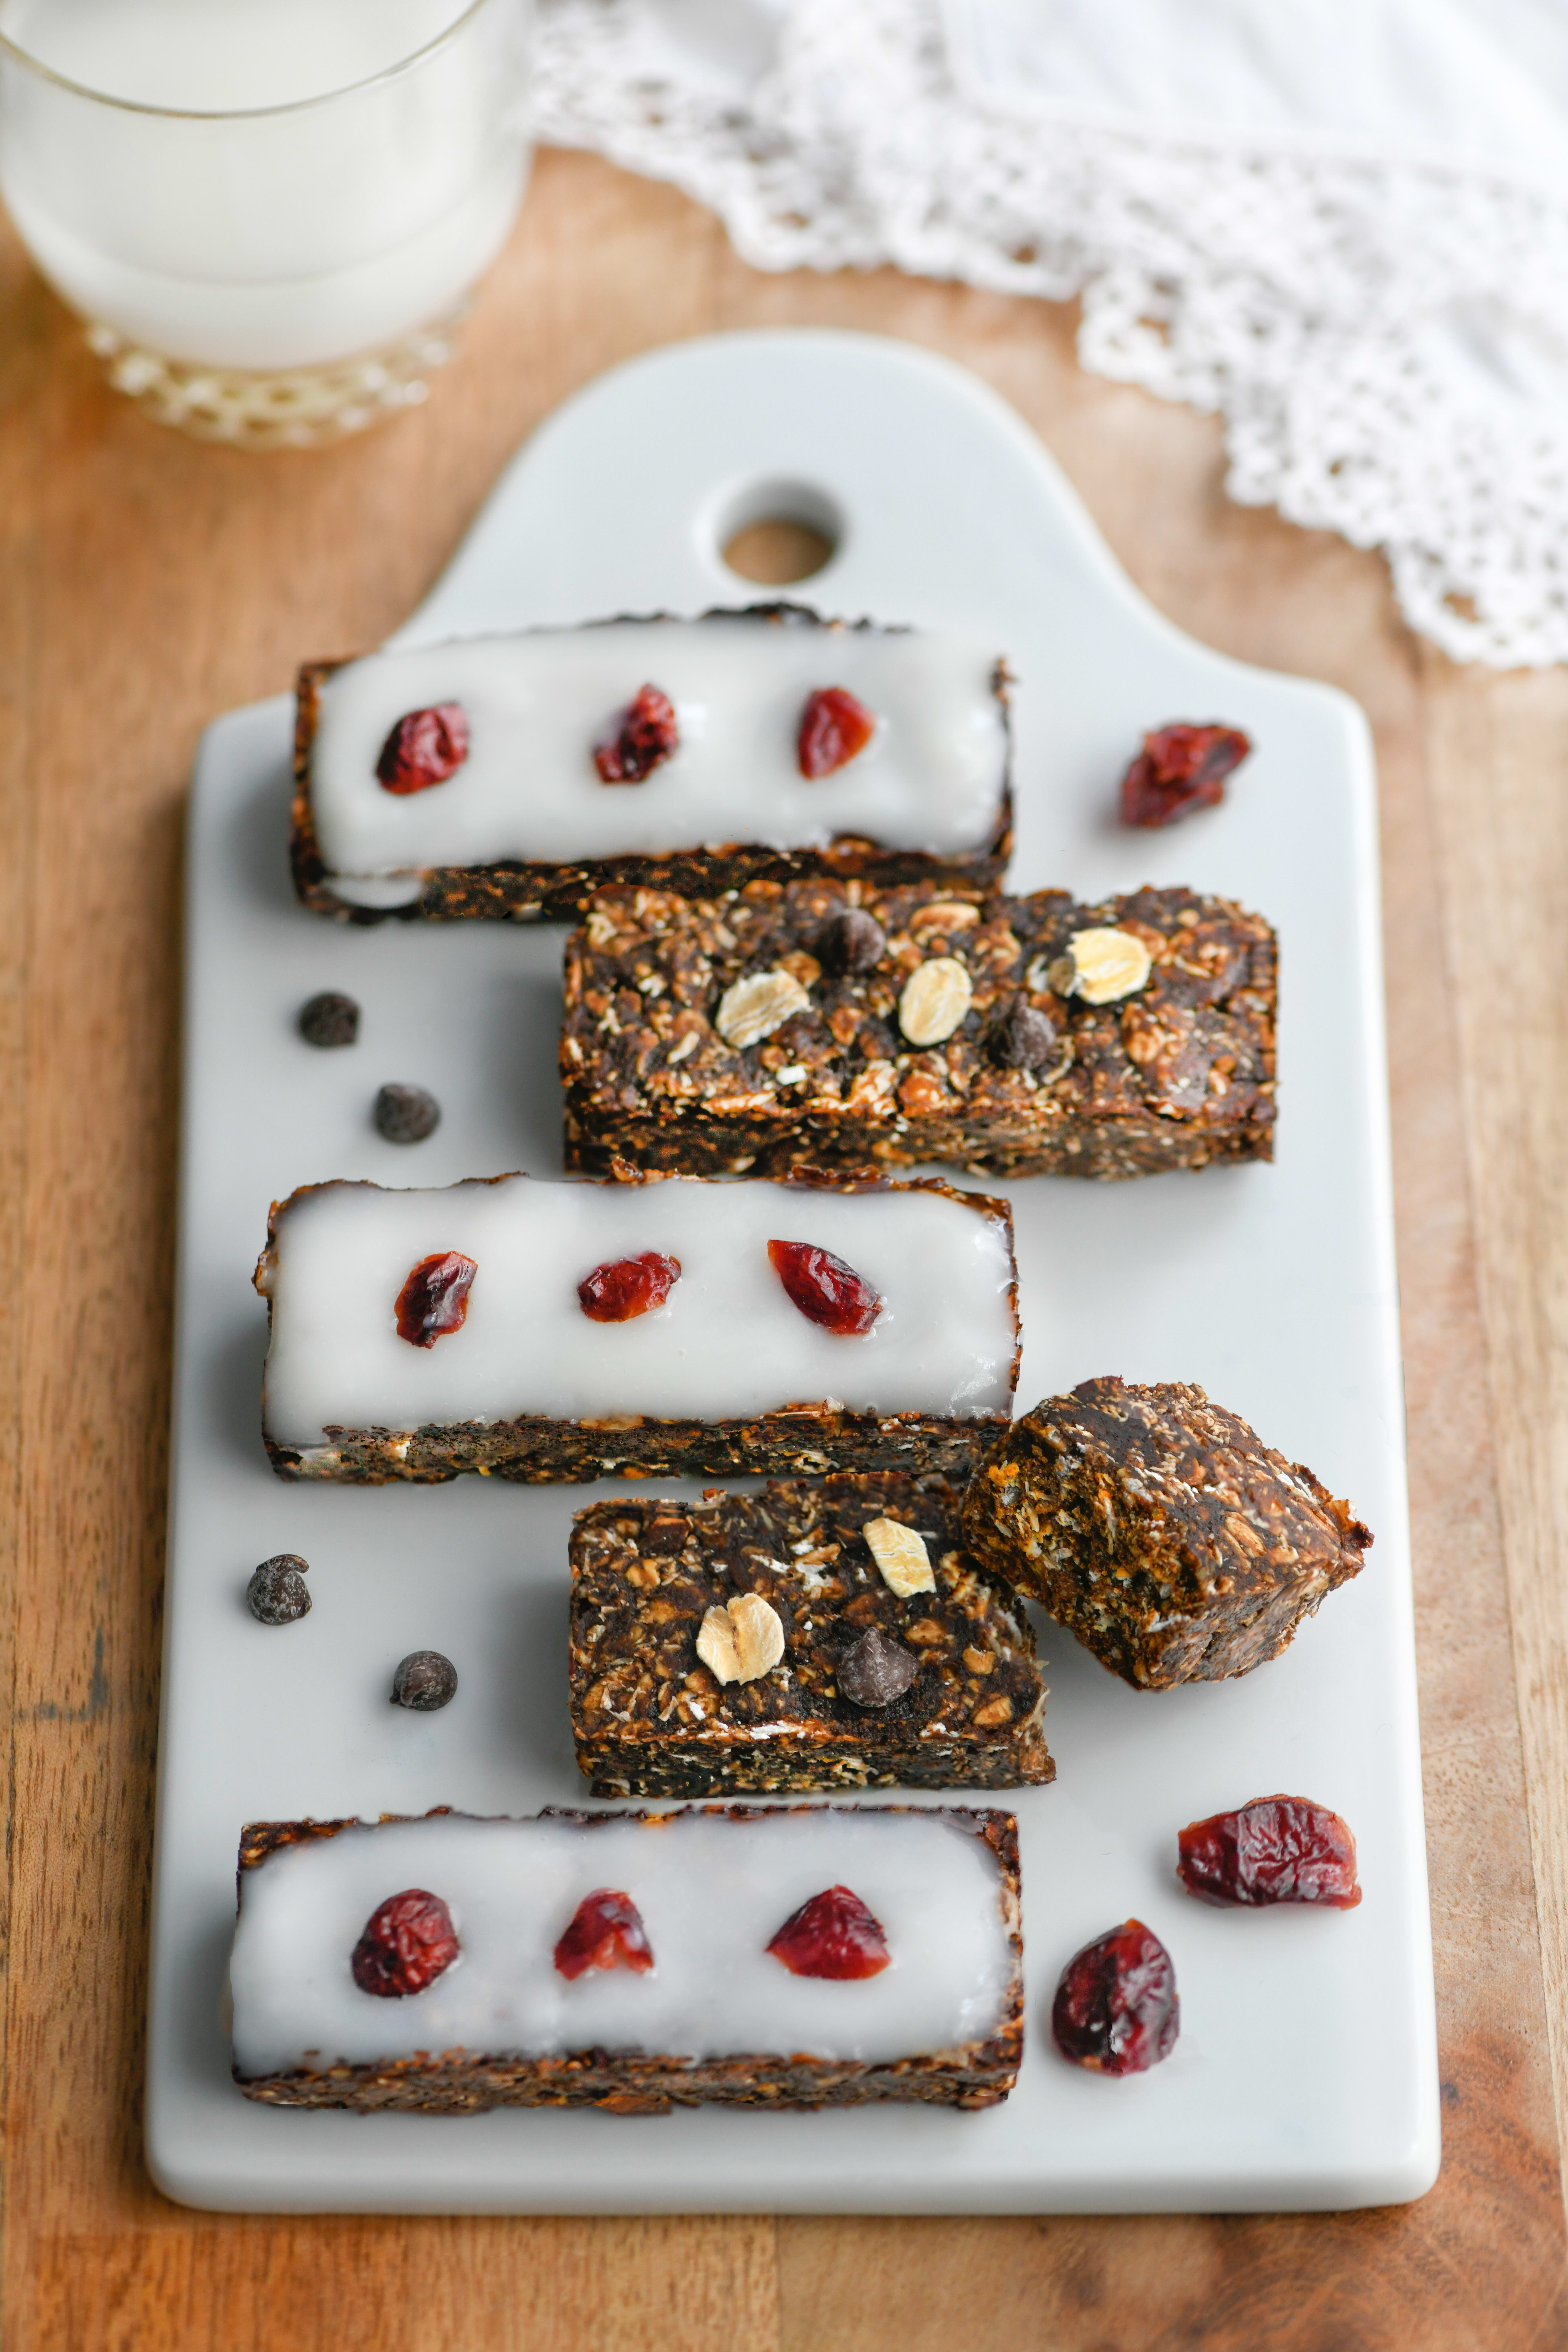 Photo of Chocolate & coconut protein cereal bar by WW